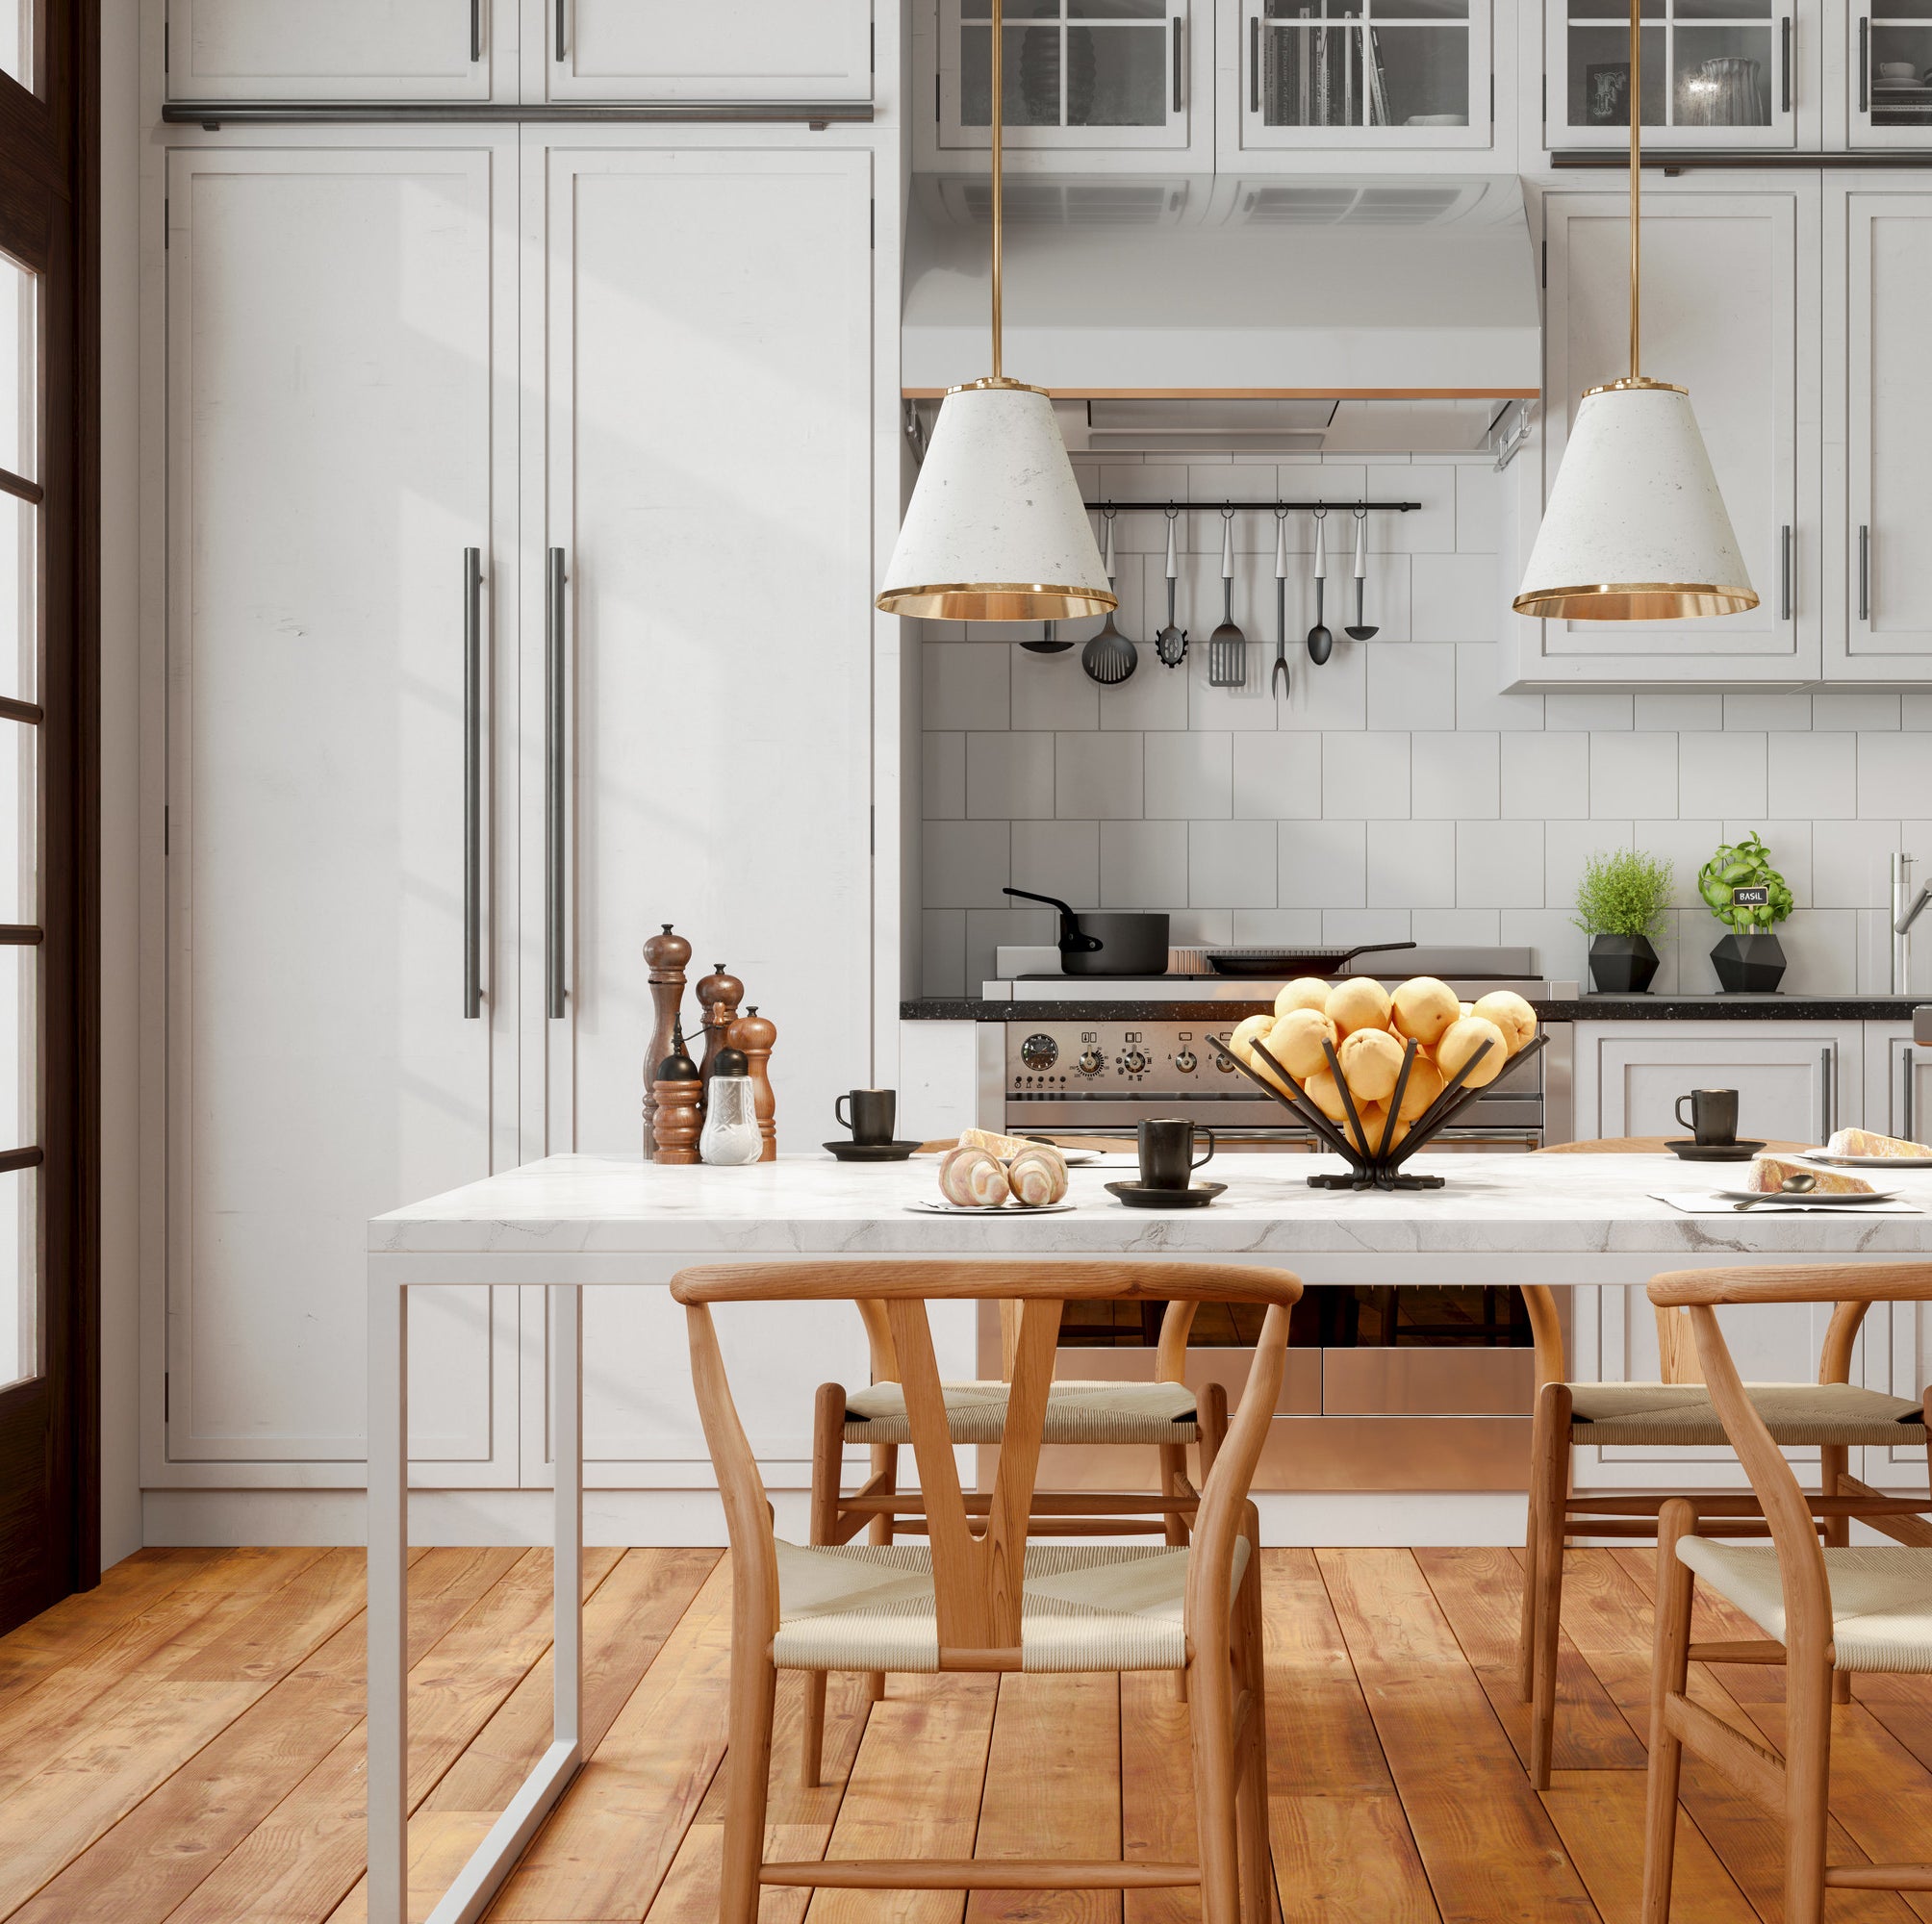 Bright, white-hued kitchen with natural wood floors